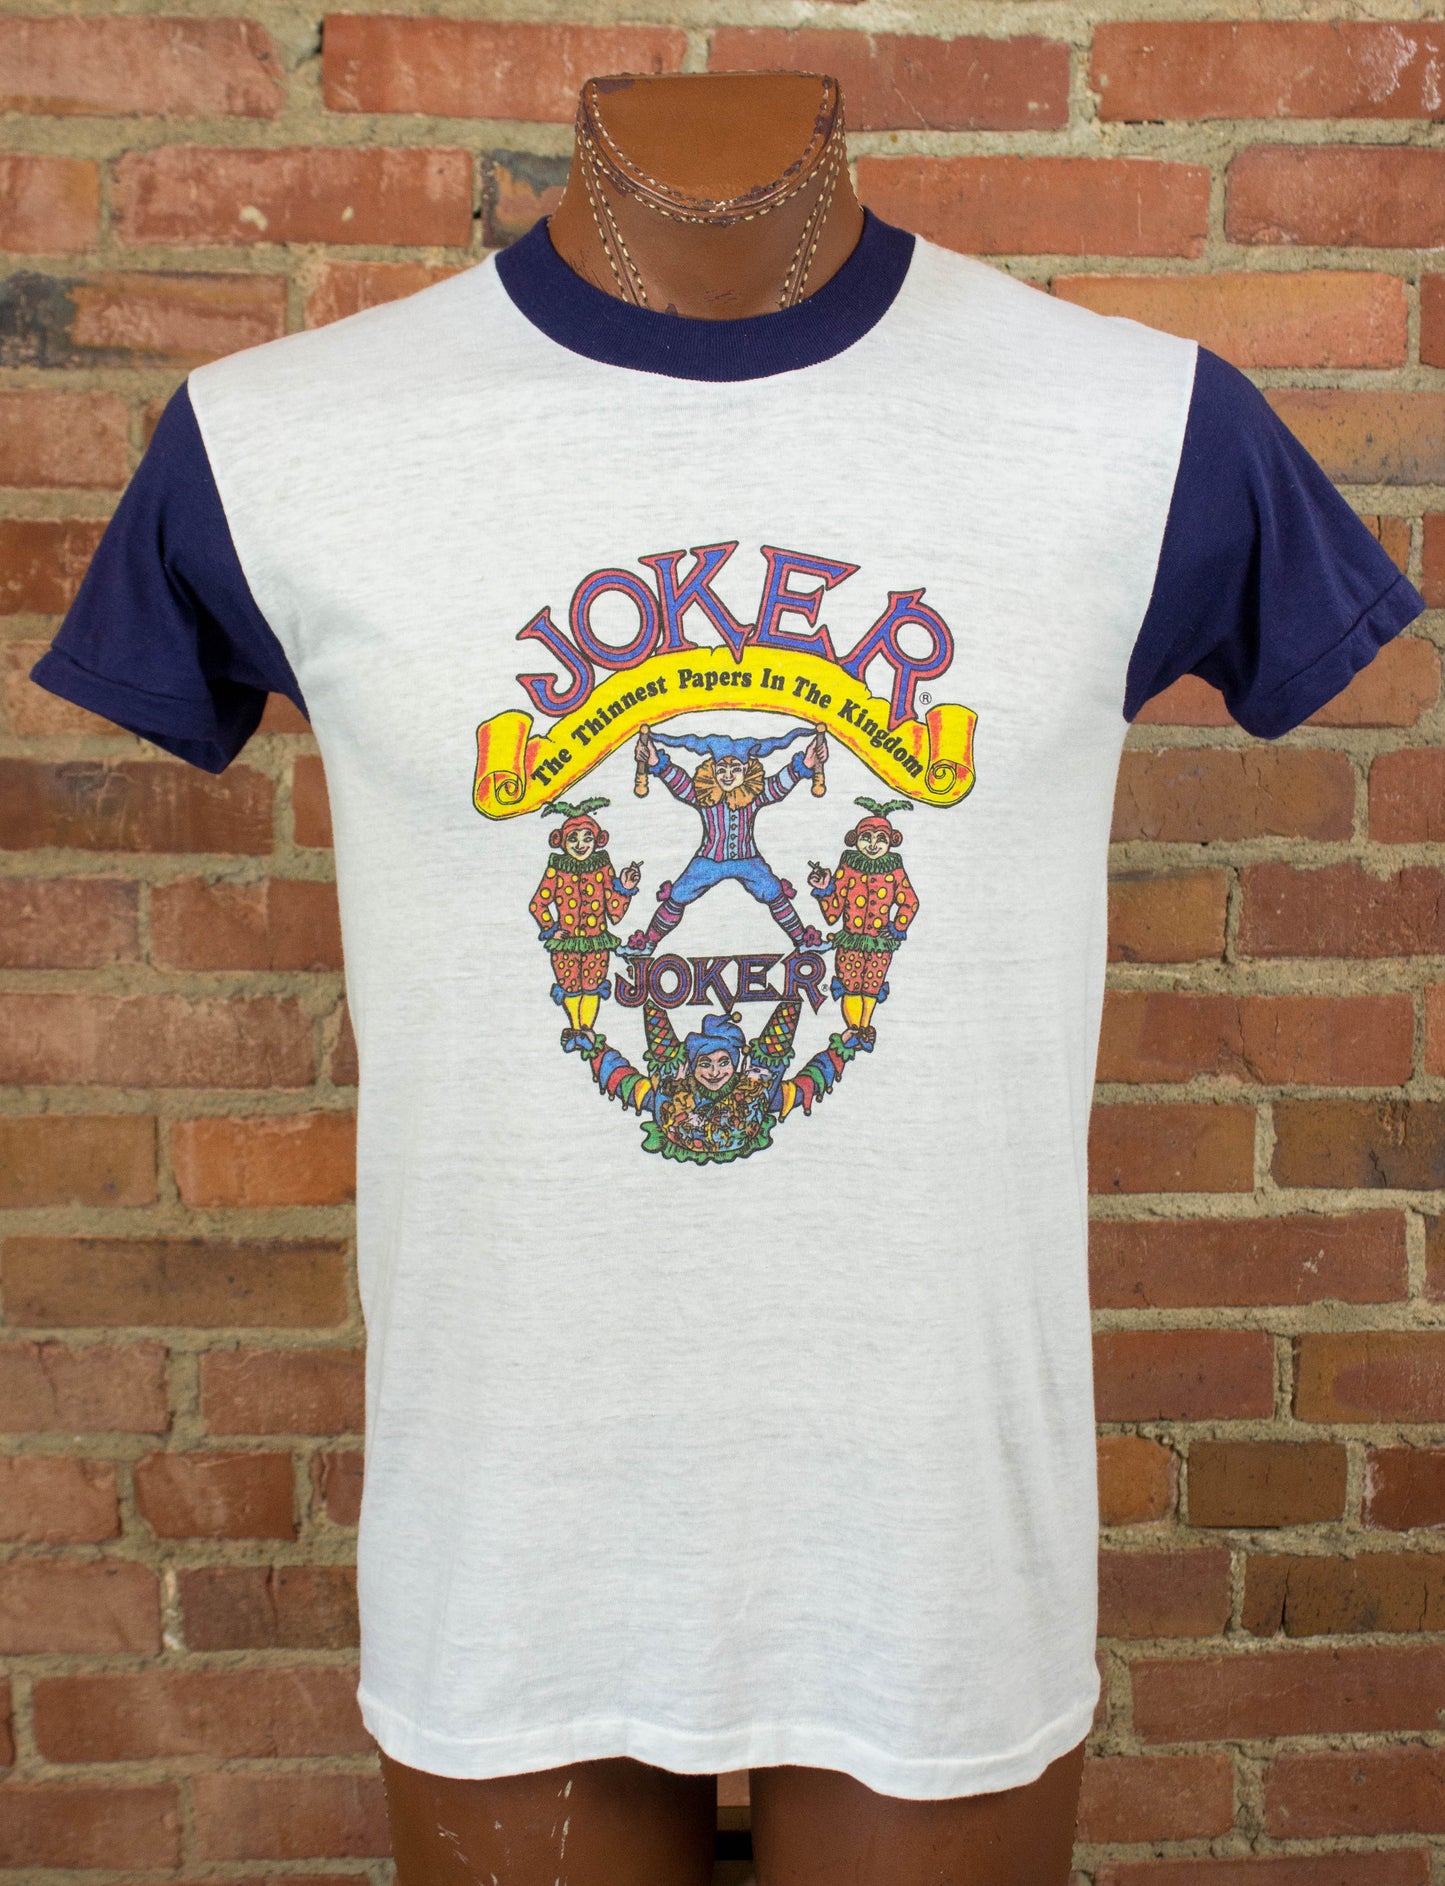 Vintage Joker Rolling Papers Graphic T Shirt 80s The Thinnest Papers In The Kingdom White and Navy Blue Medium-Large